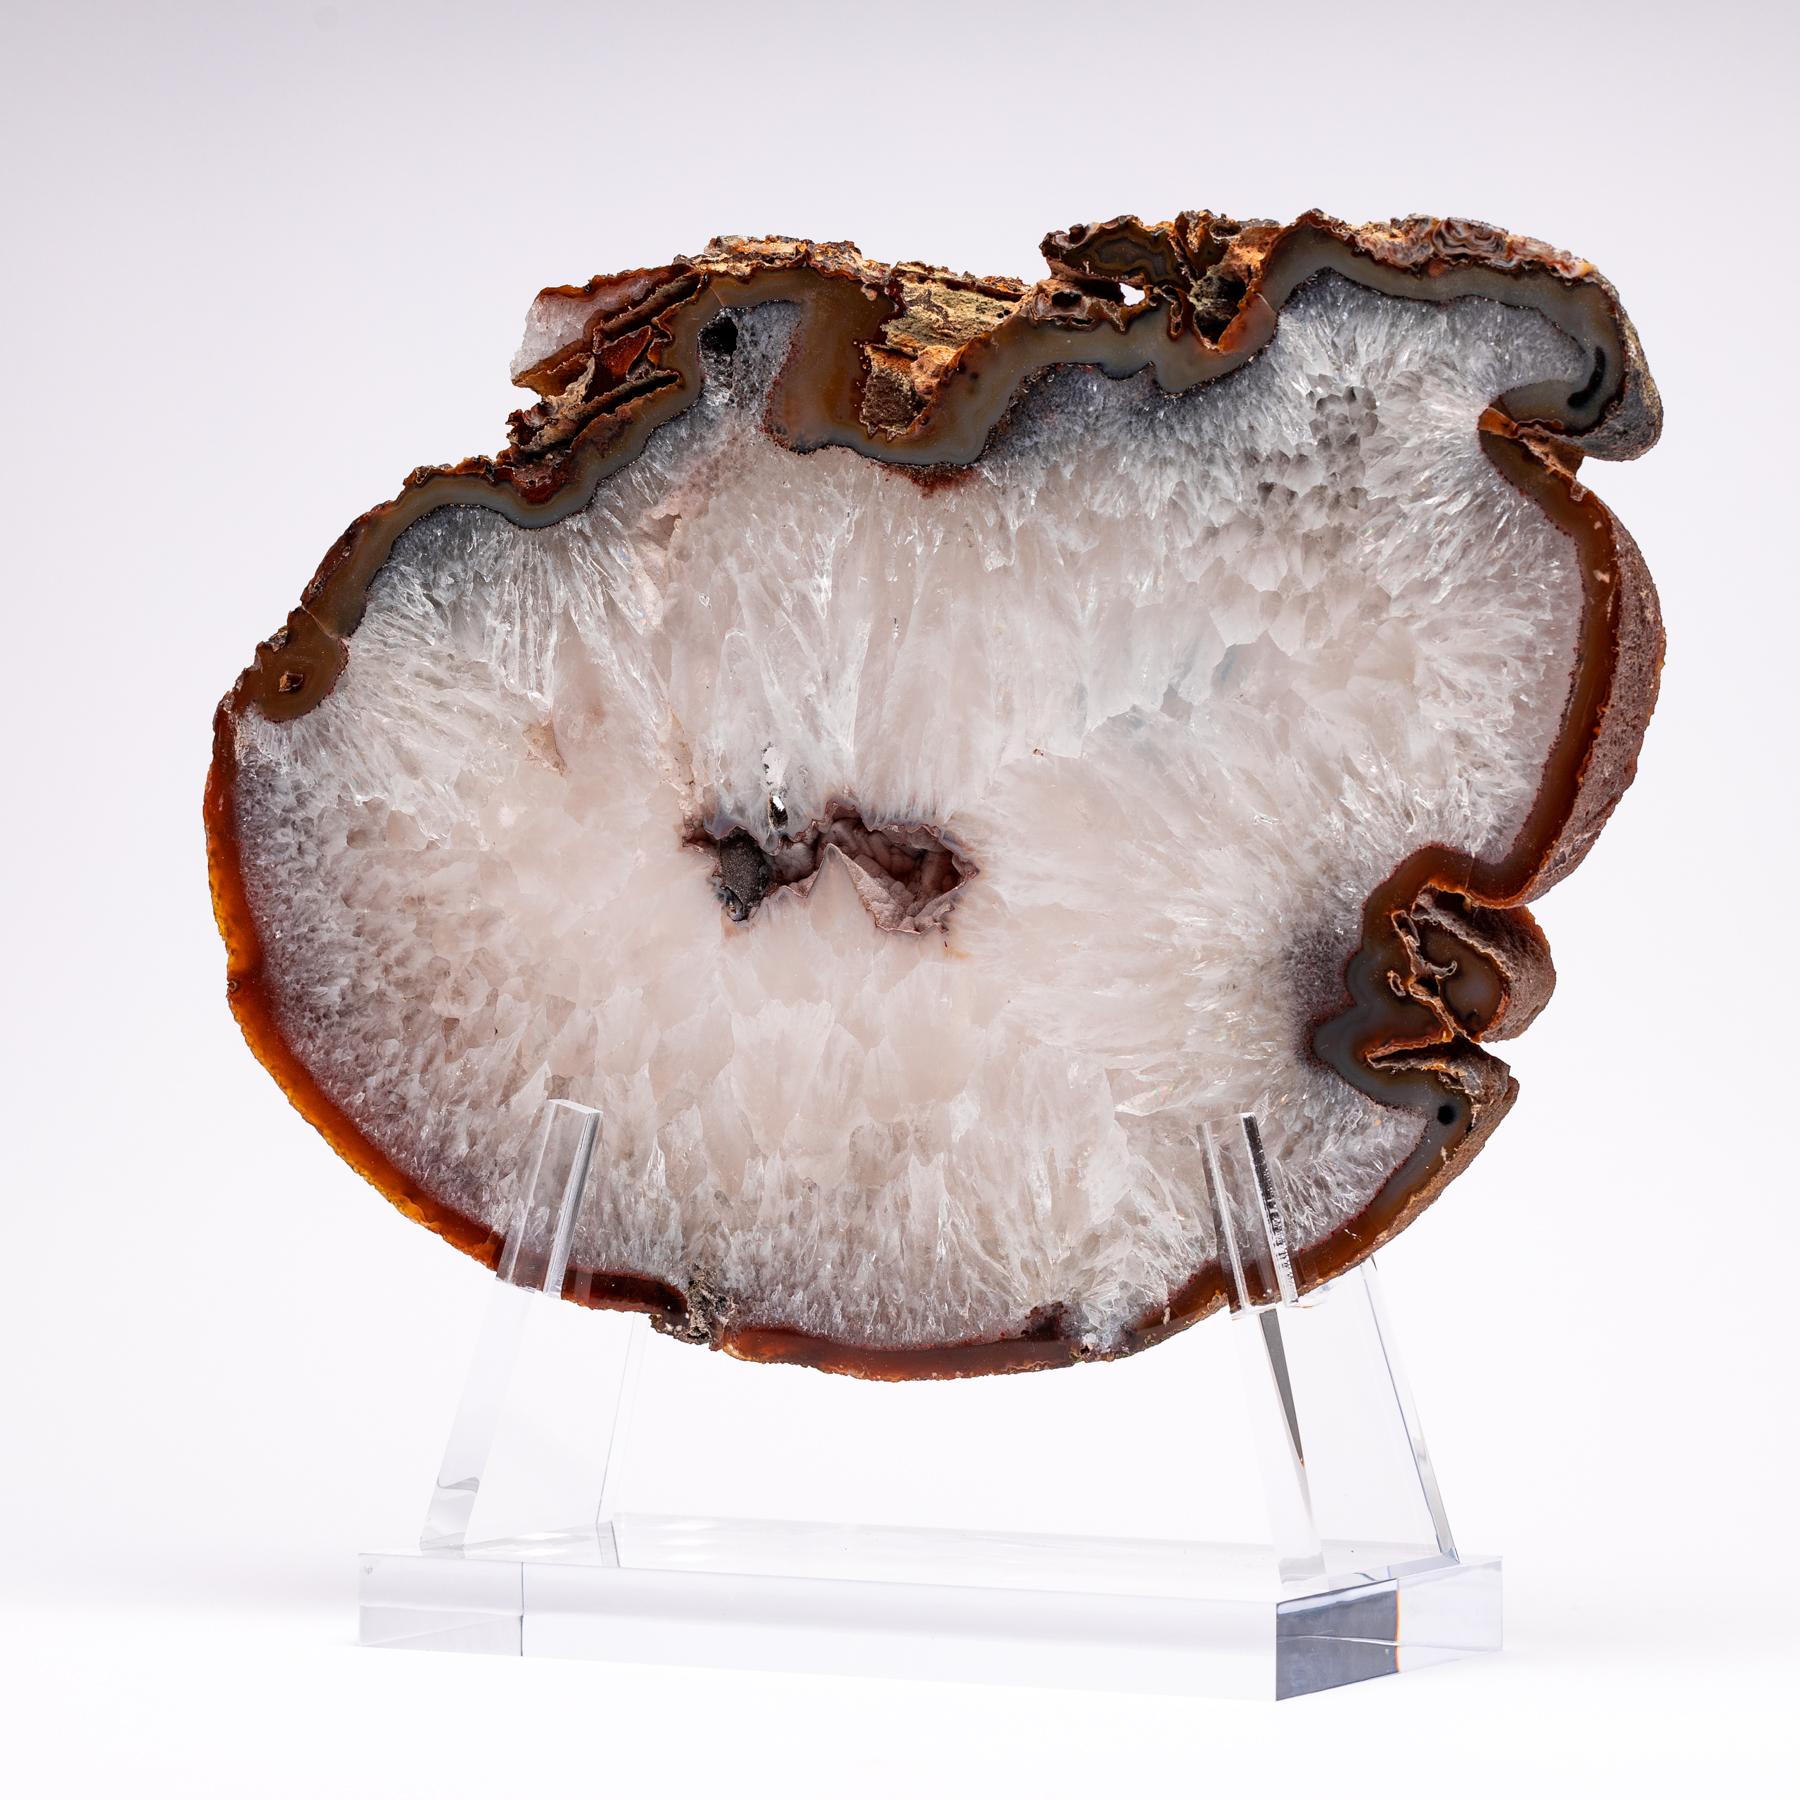 Top grade agate slab from Brazil
Agates are formed in rounded nodules, which are sliced open to bring out the internal pattern hidden in the stone. Their formation is commonly from depositions of layers of silica filling voids in volcanic vesicles